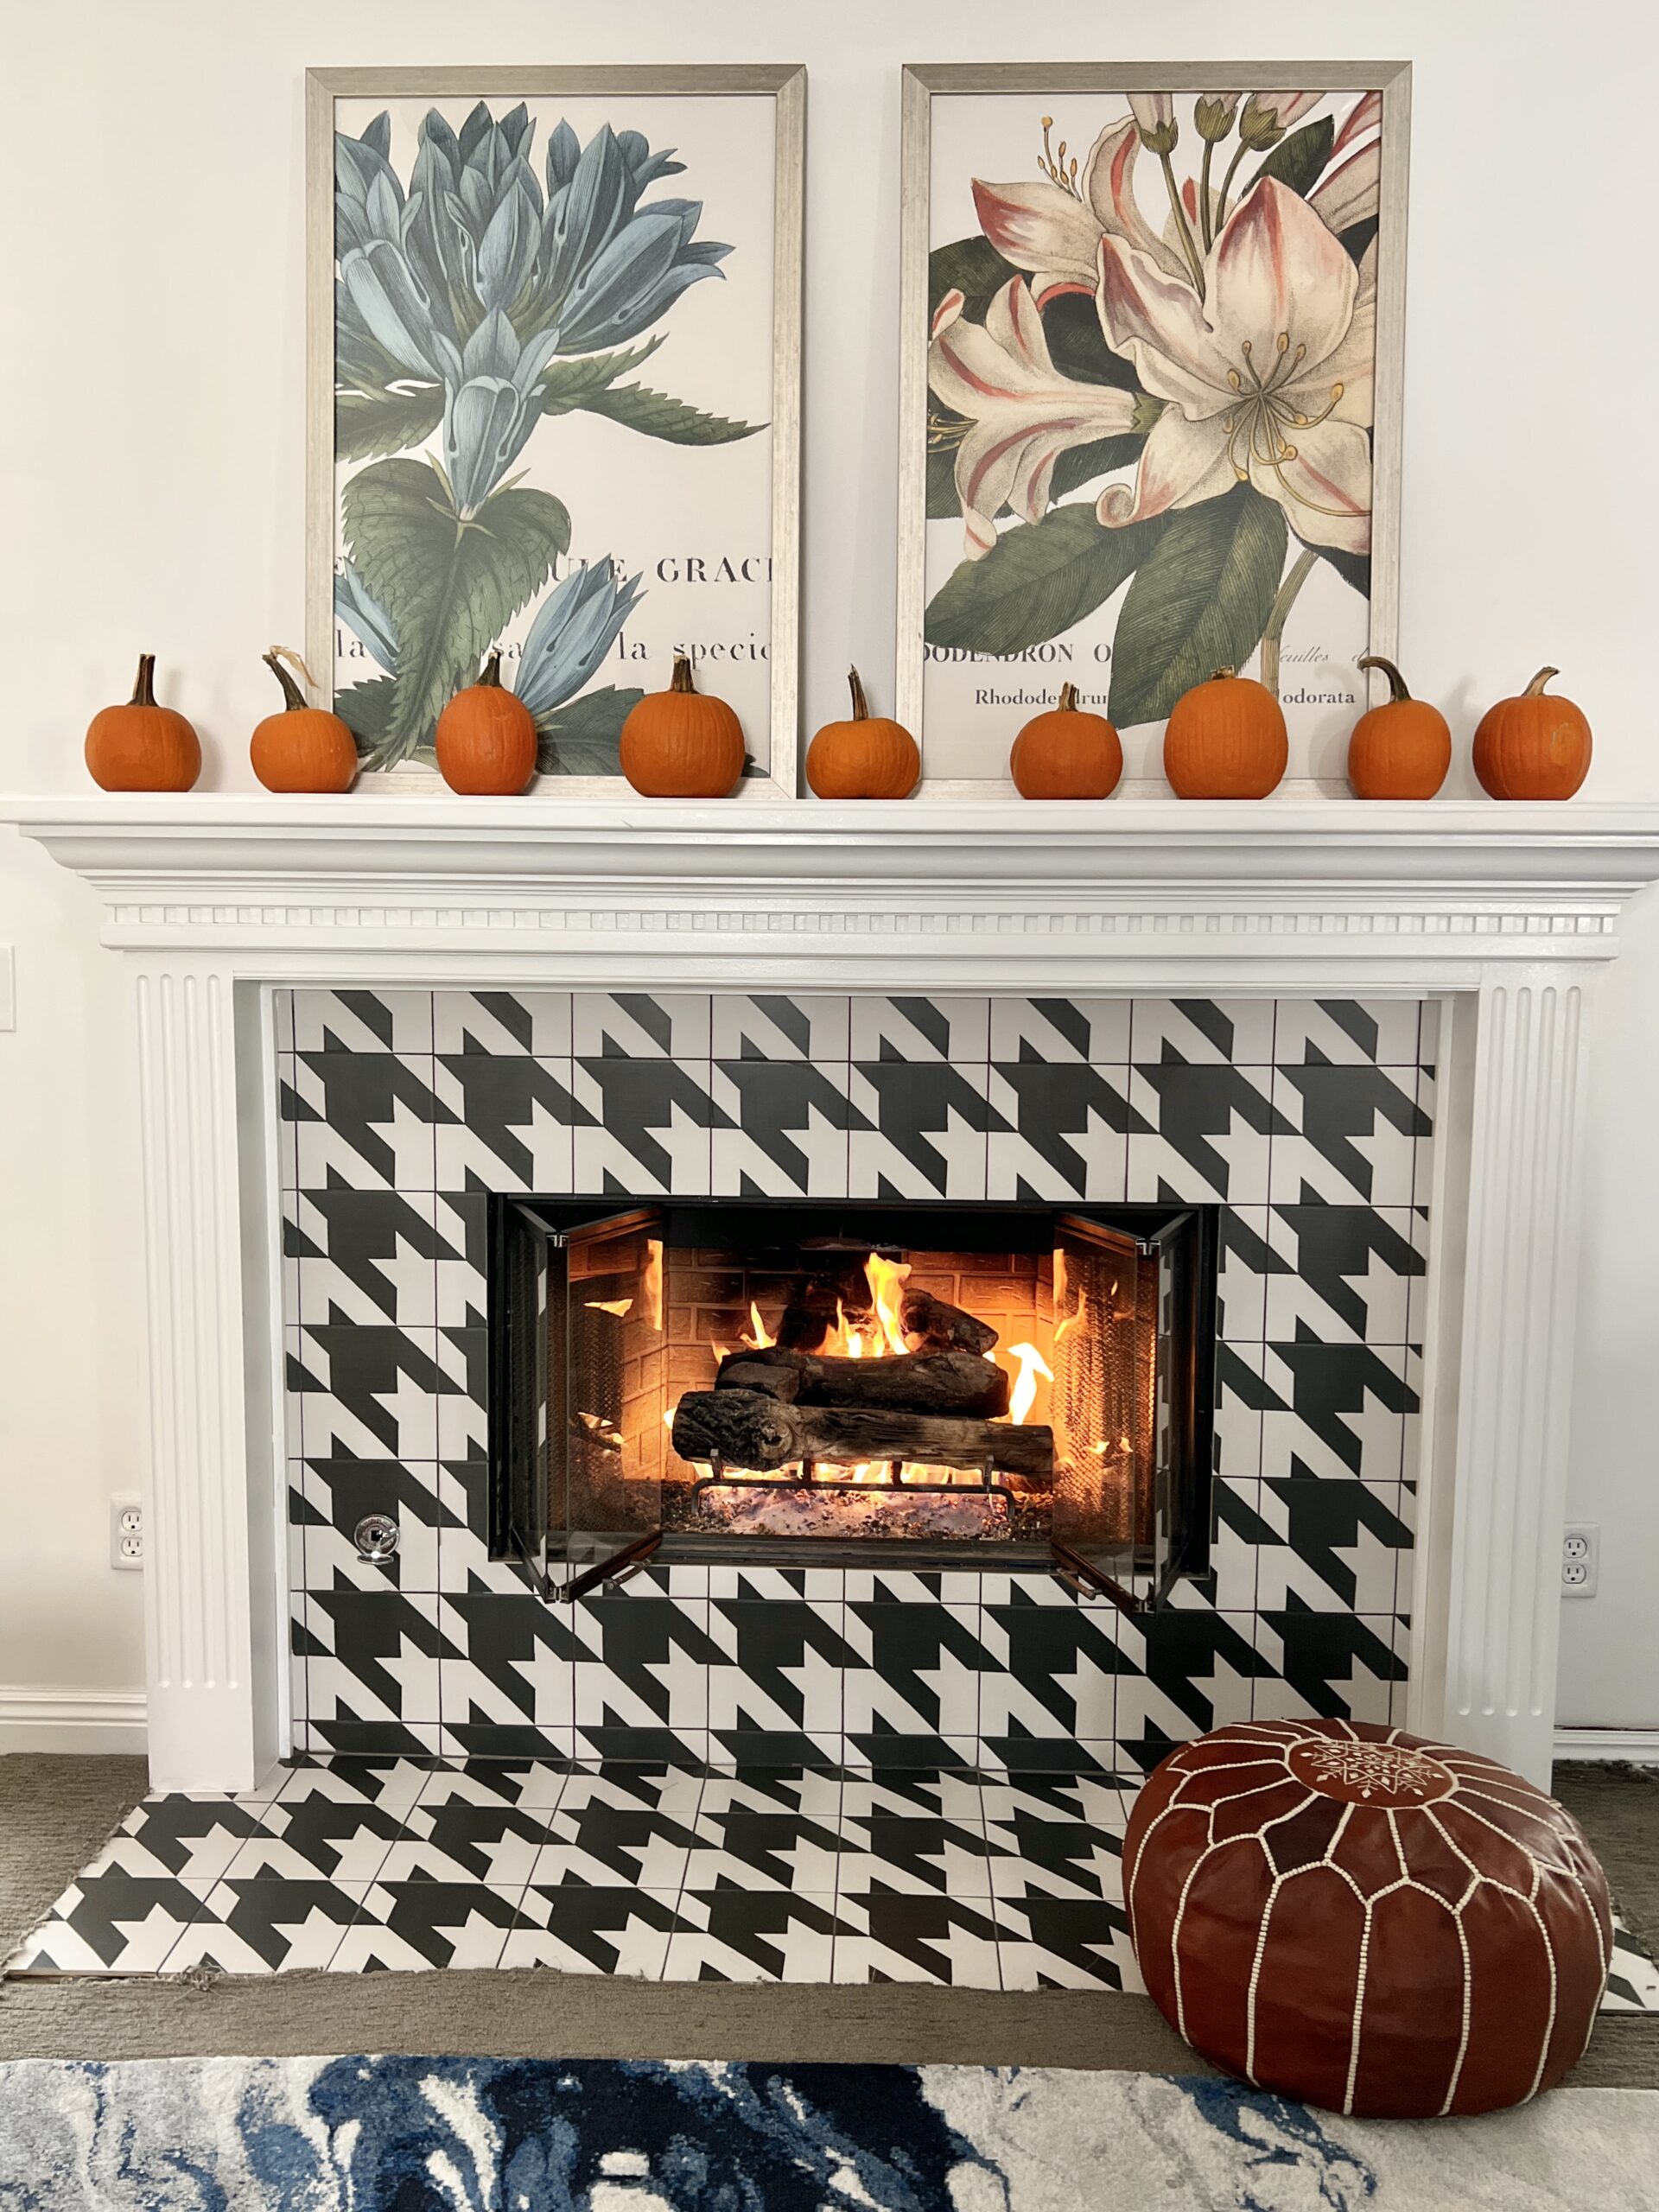 A houndstooth tiled fireplace with sugar pumpkins on the mantel.